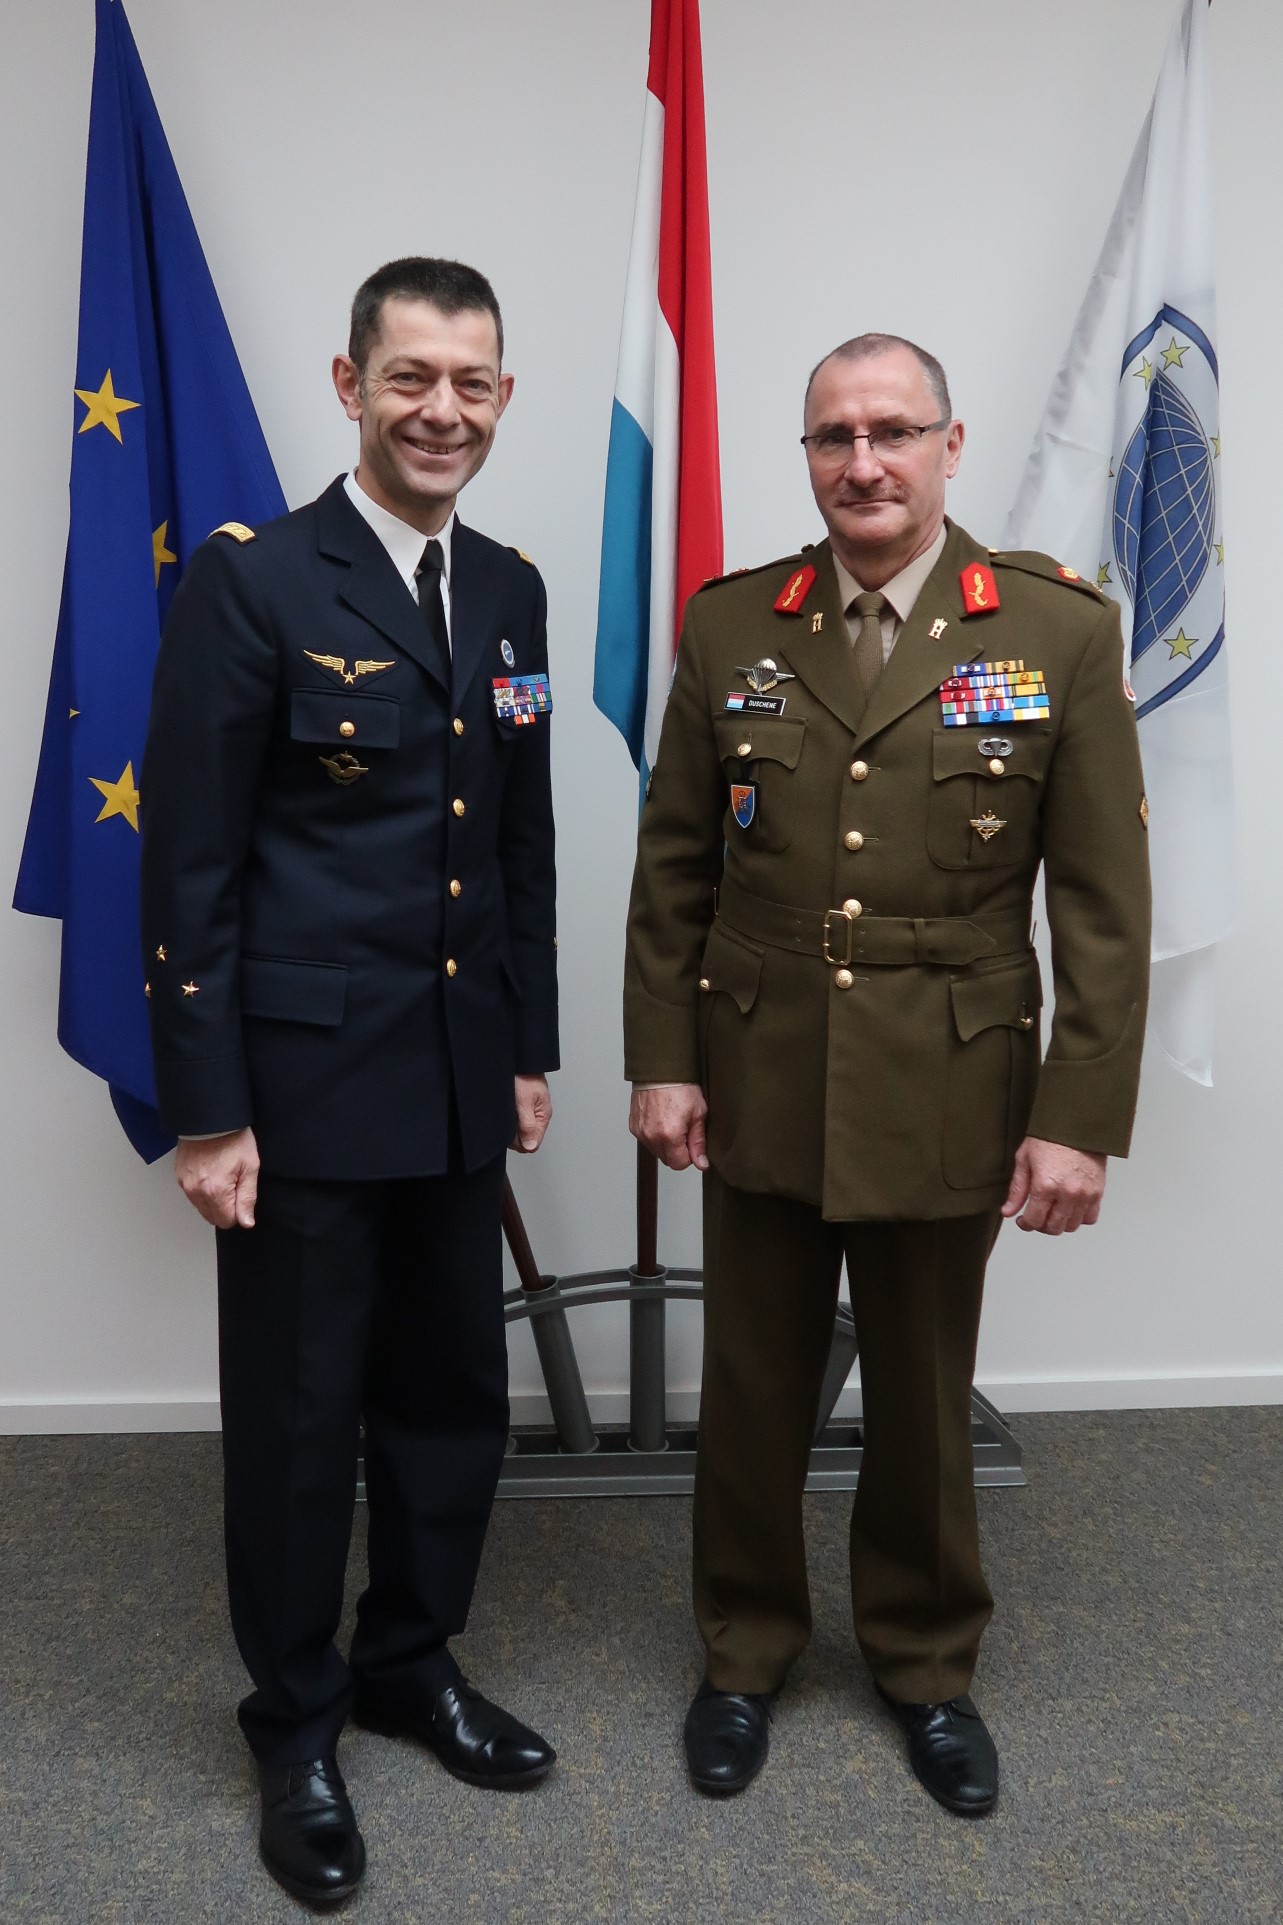 The Commander EATC visits the  Luxembourg  Chief of Defence.